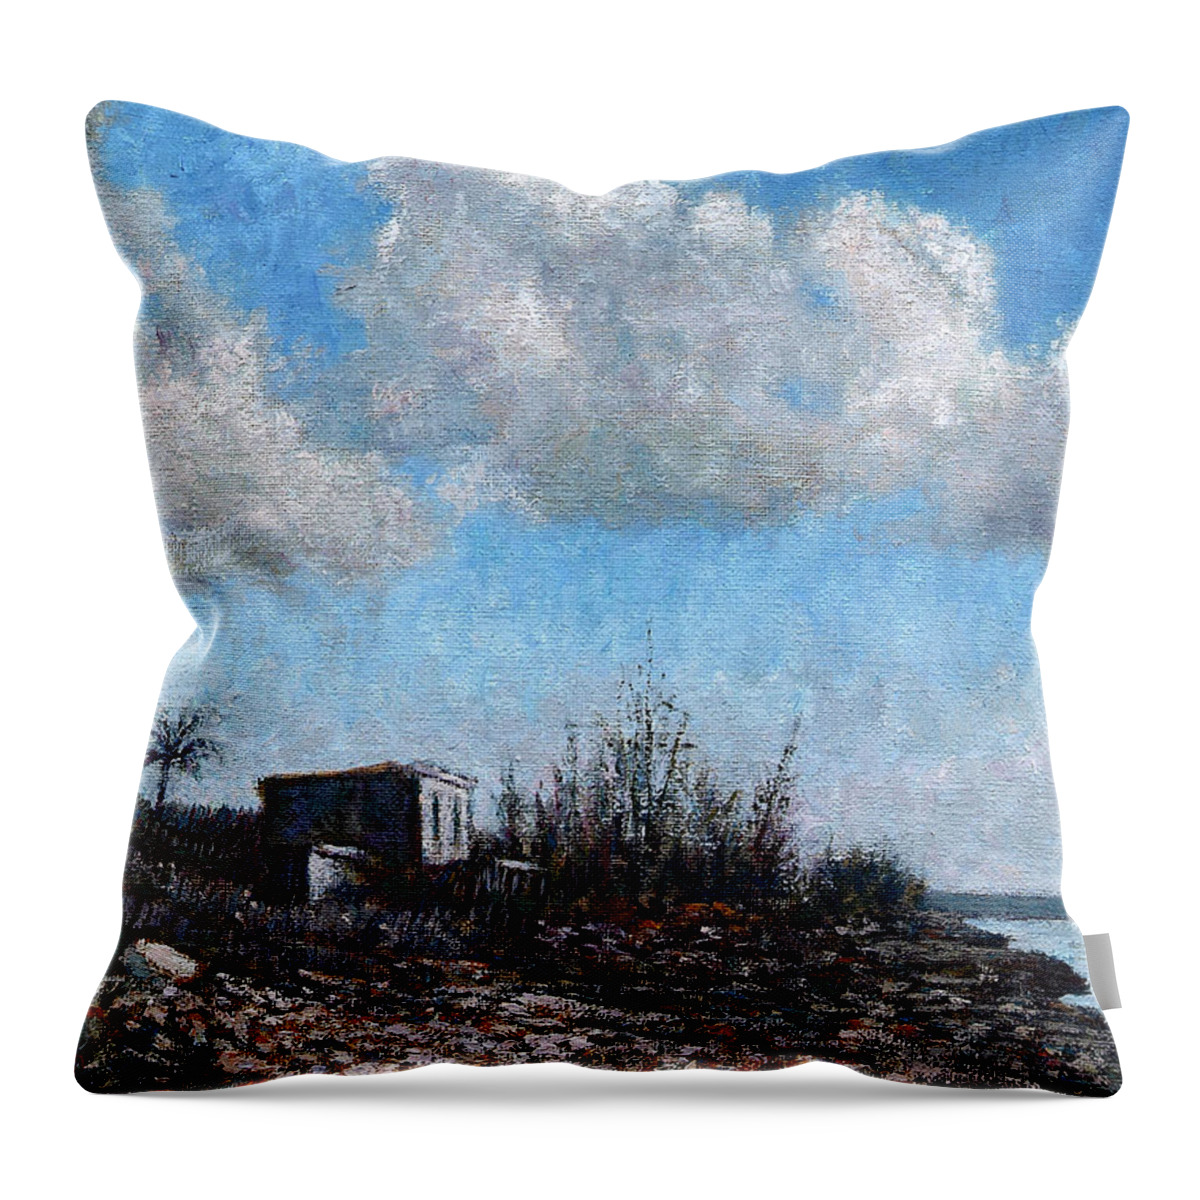 Current Ridge Throw Pillow featuring the painting Evening at Current Ridge by Ritchie Eyma